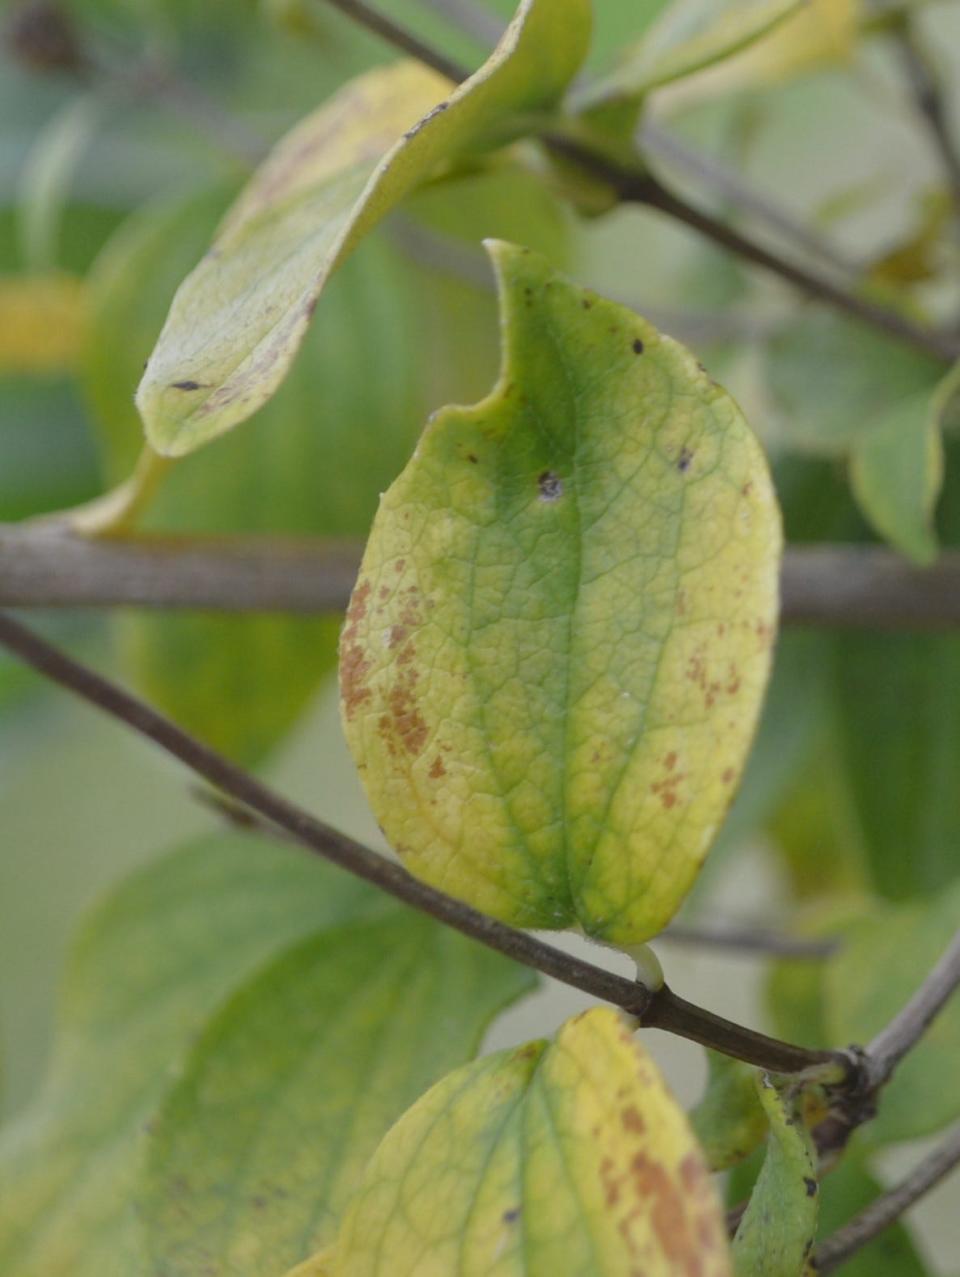 Younger leaves infected by dogwood anthracnose become curled in addition to showing brown, tan or black spots.